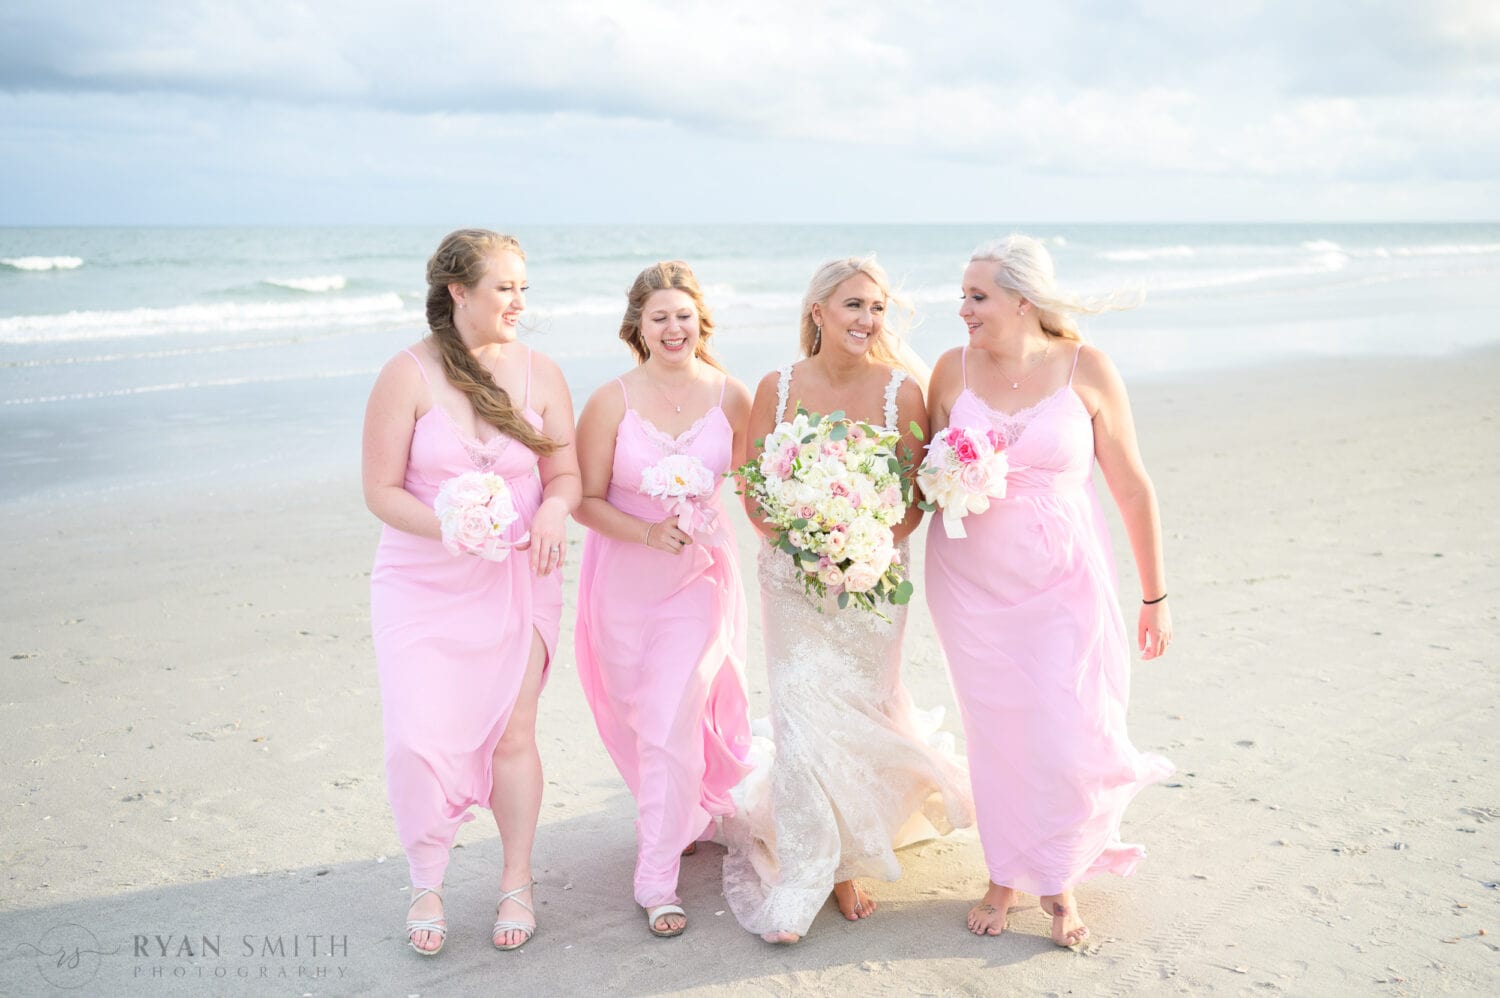 Bridal party walking on the beach - 21 Main Events at North Beach